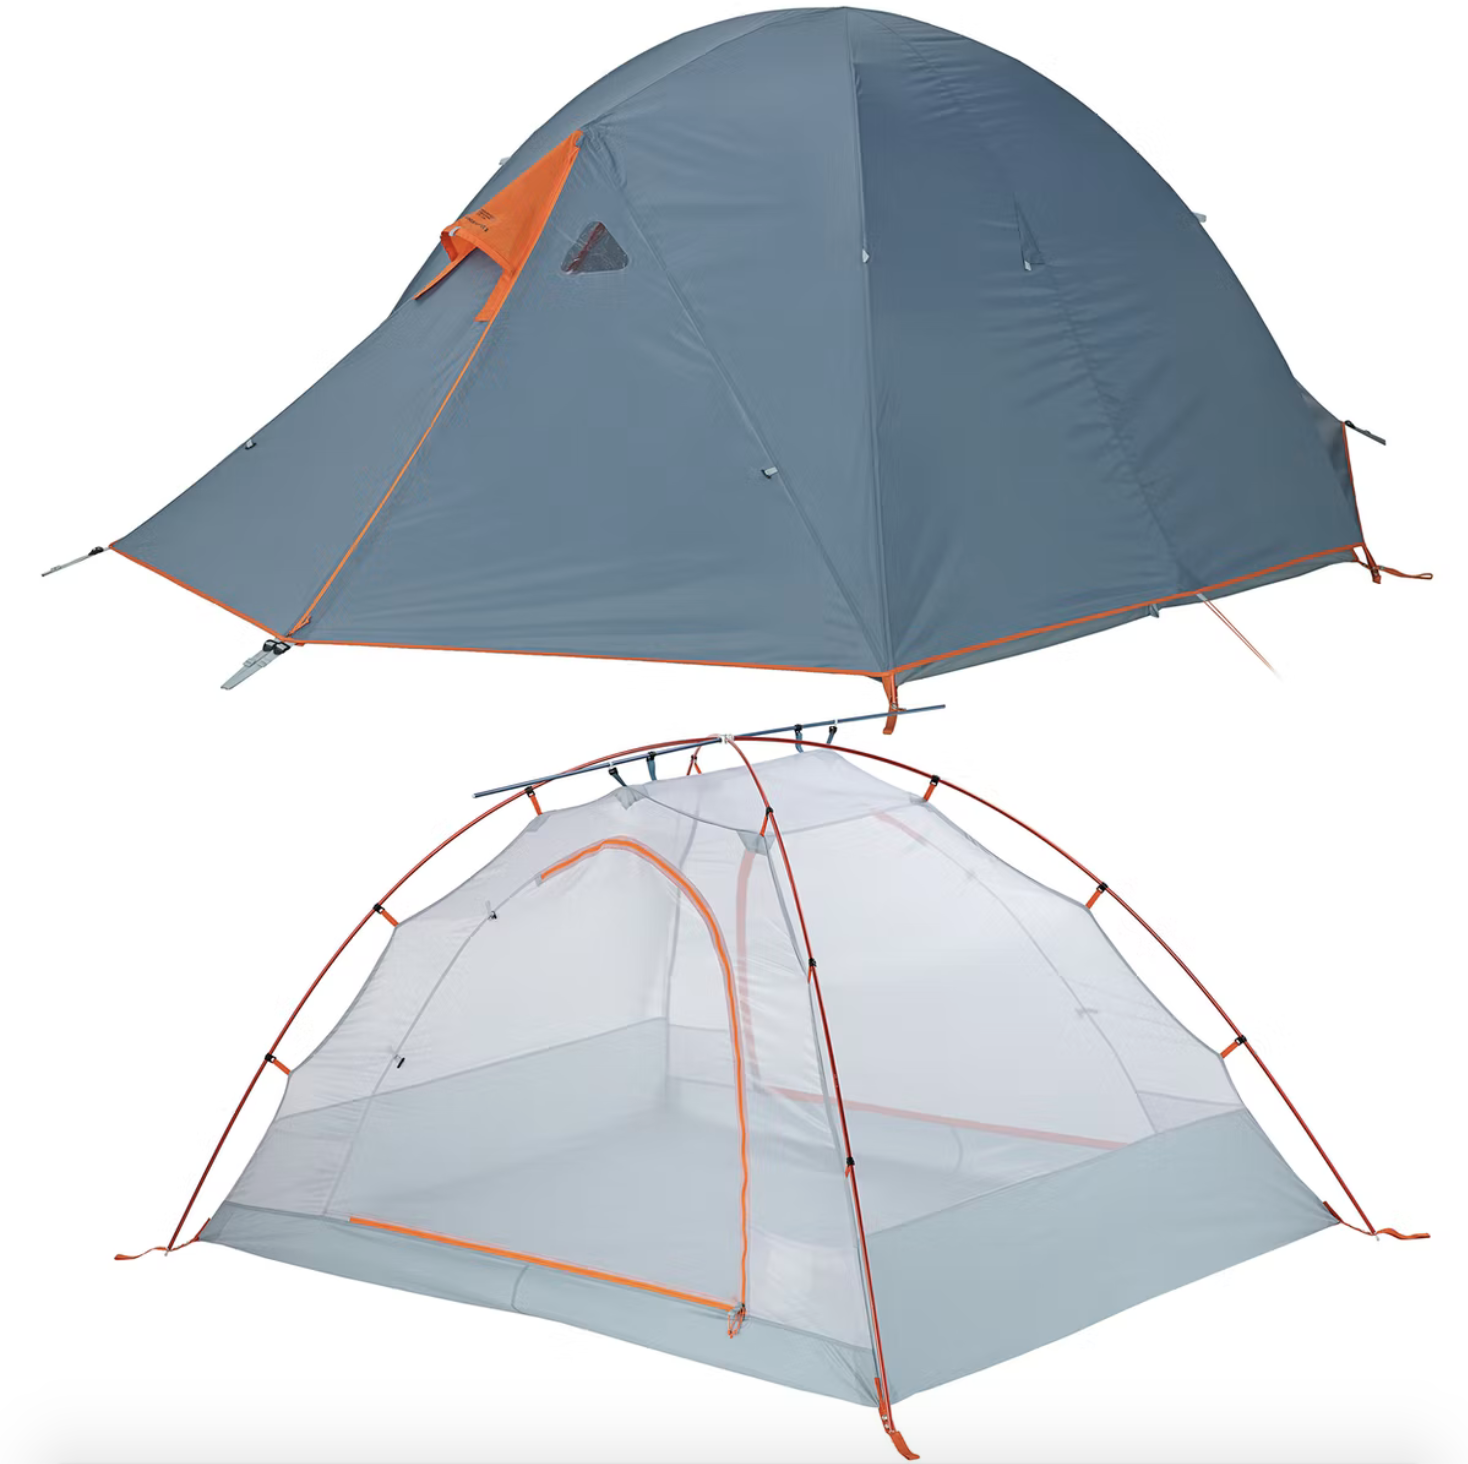 Rent Camping Gear and Backpacking Equipment